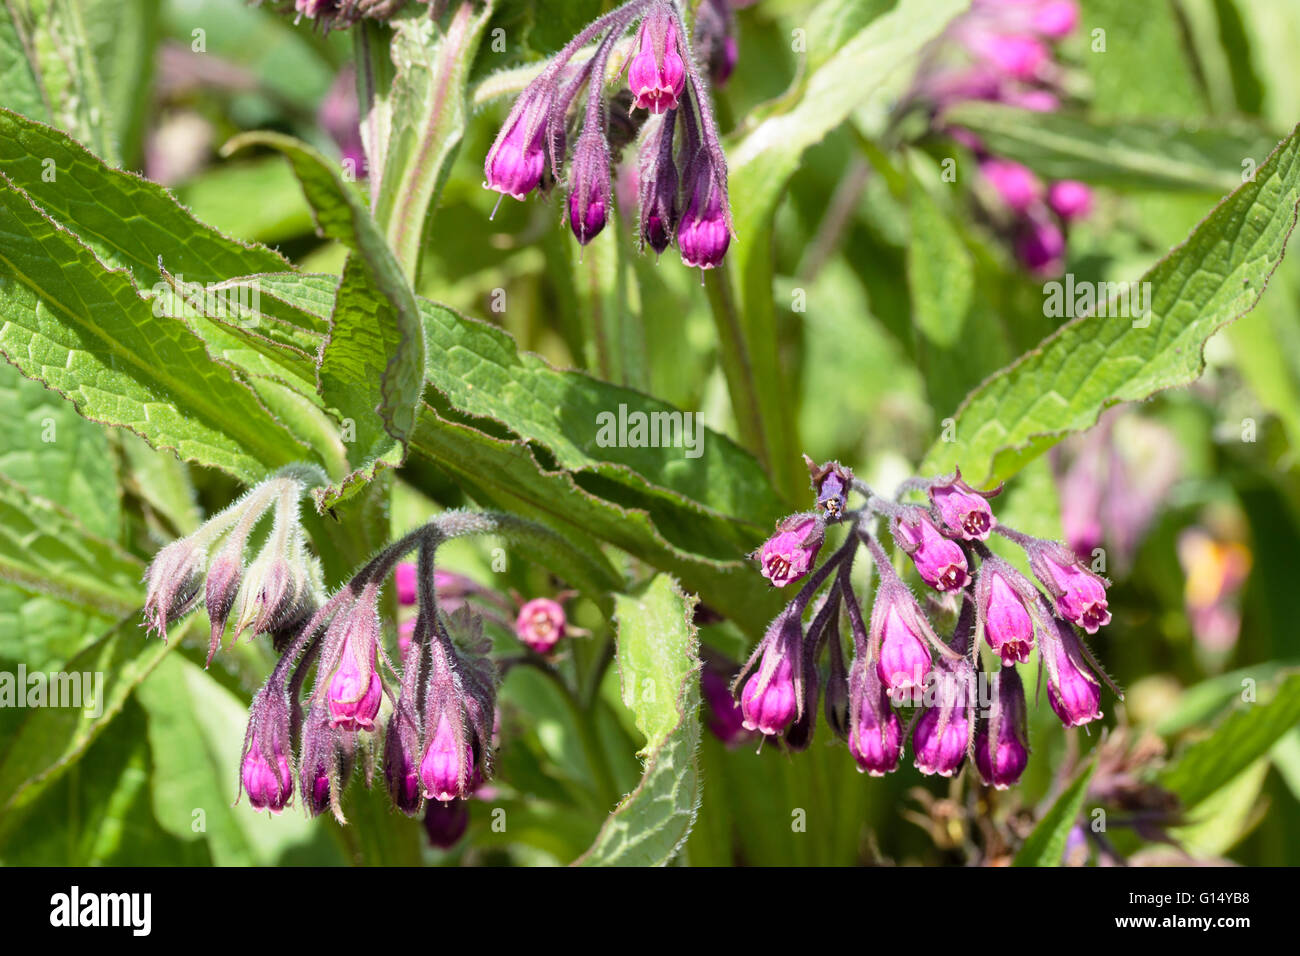 Spring flowers of the ground covering hardy perennial red comfrey, Symphytum 'Rubrum' Stock Photo